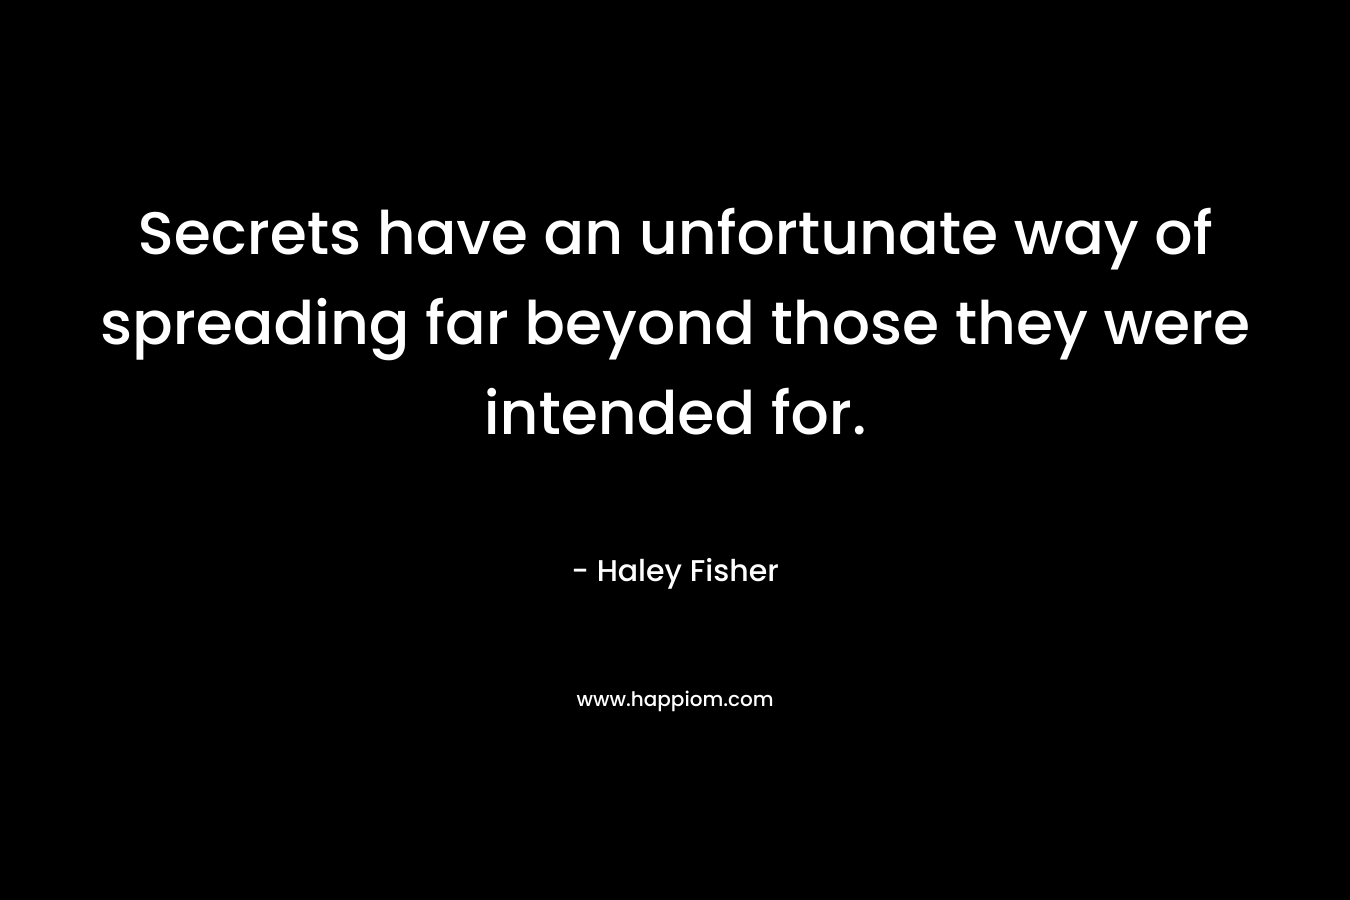 Secrets have an unfortunate way of spreading far beyond those they were intended for. – Haley Fisher